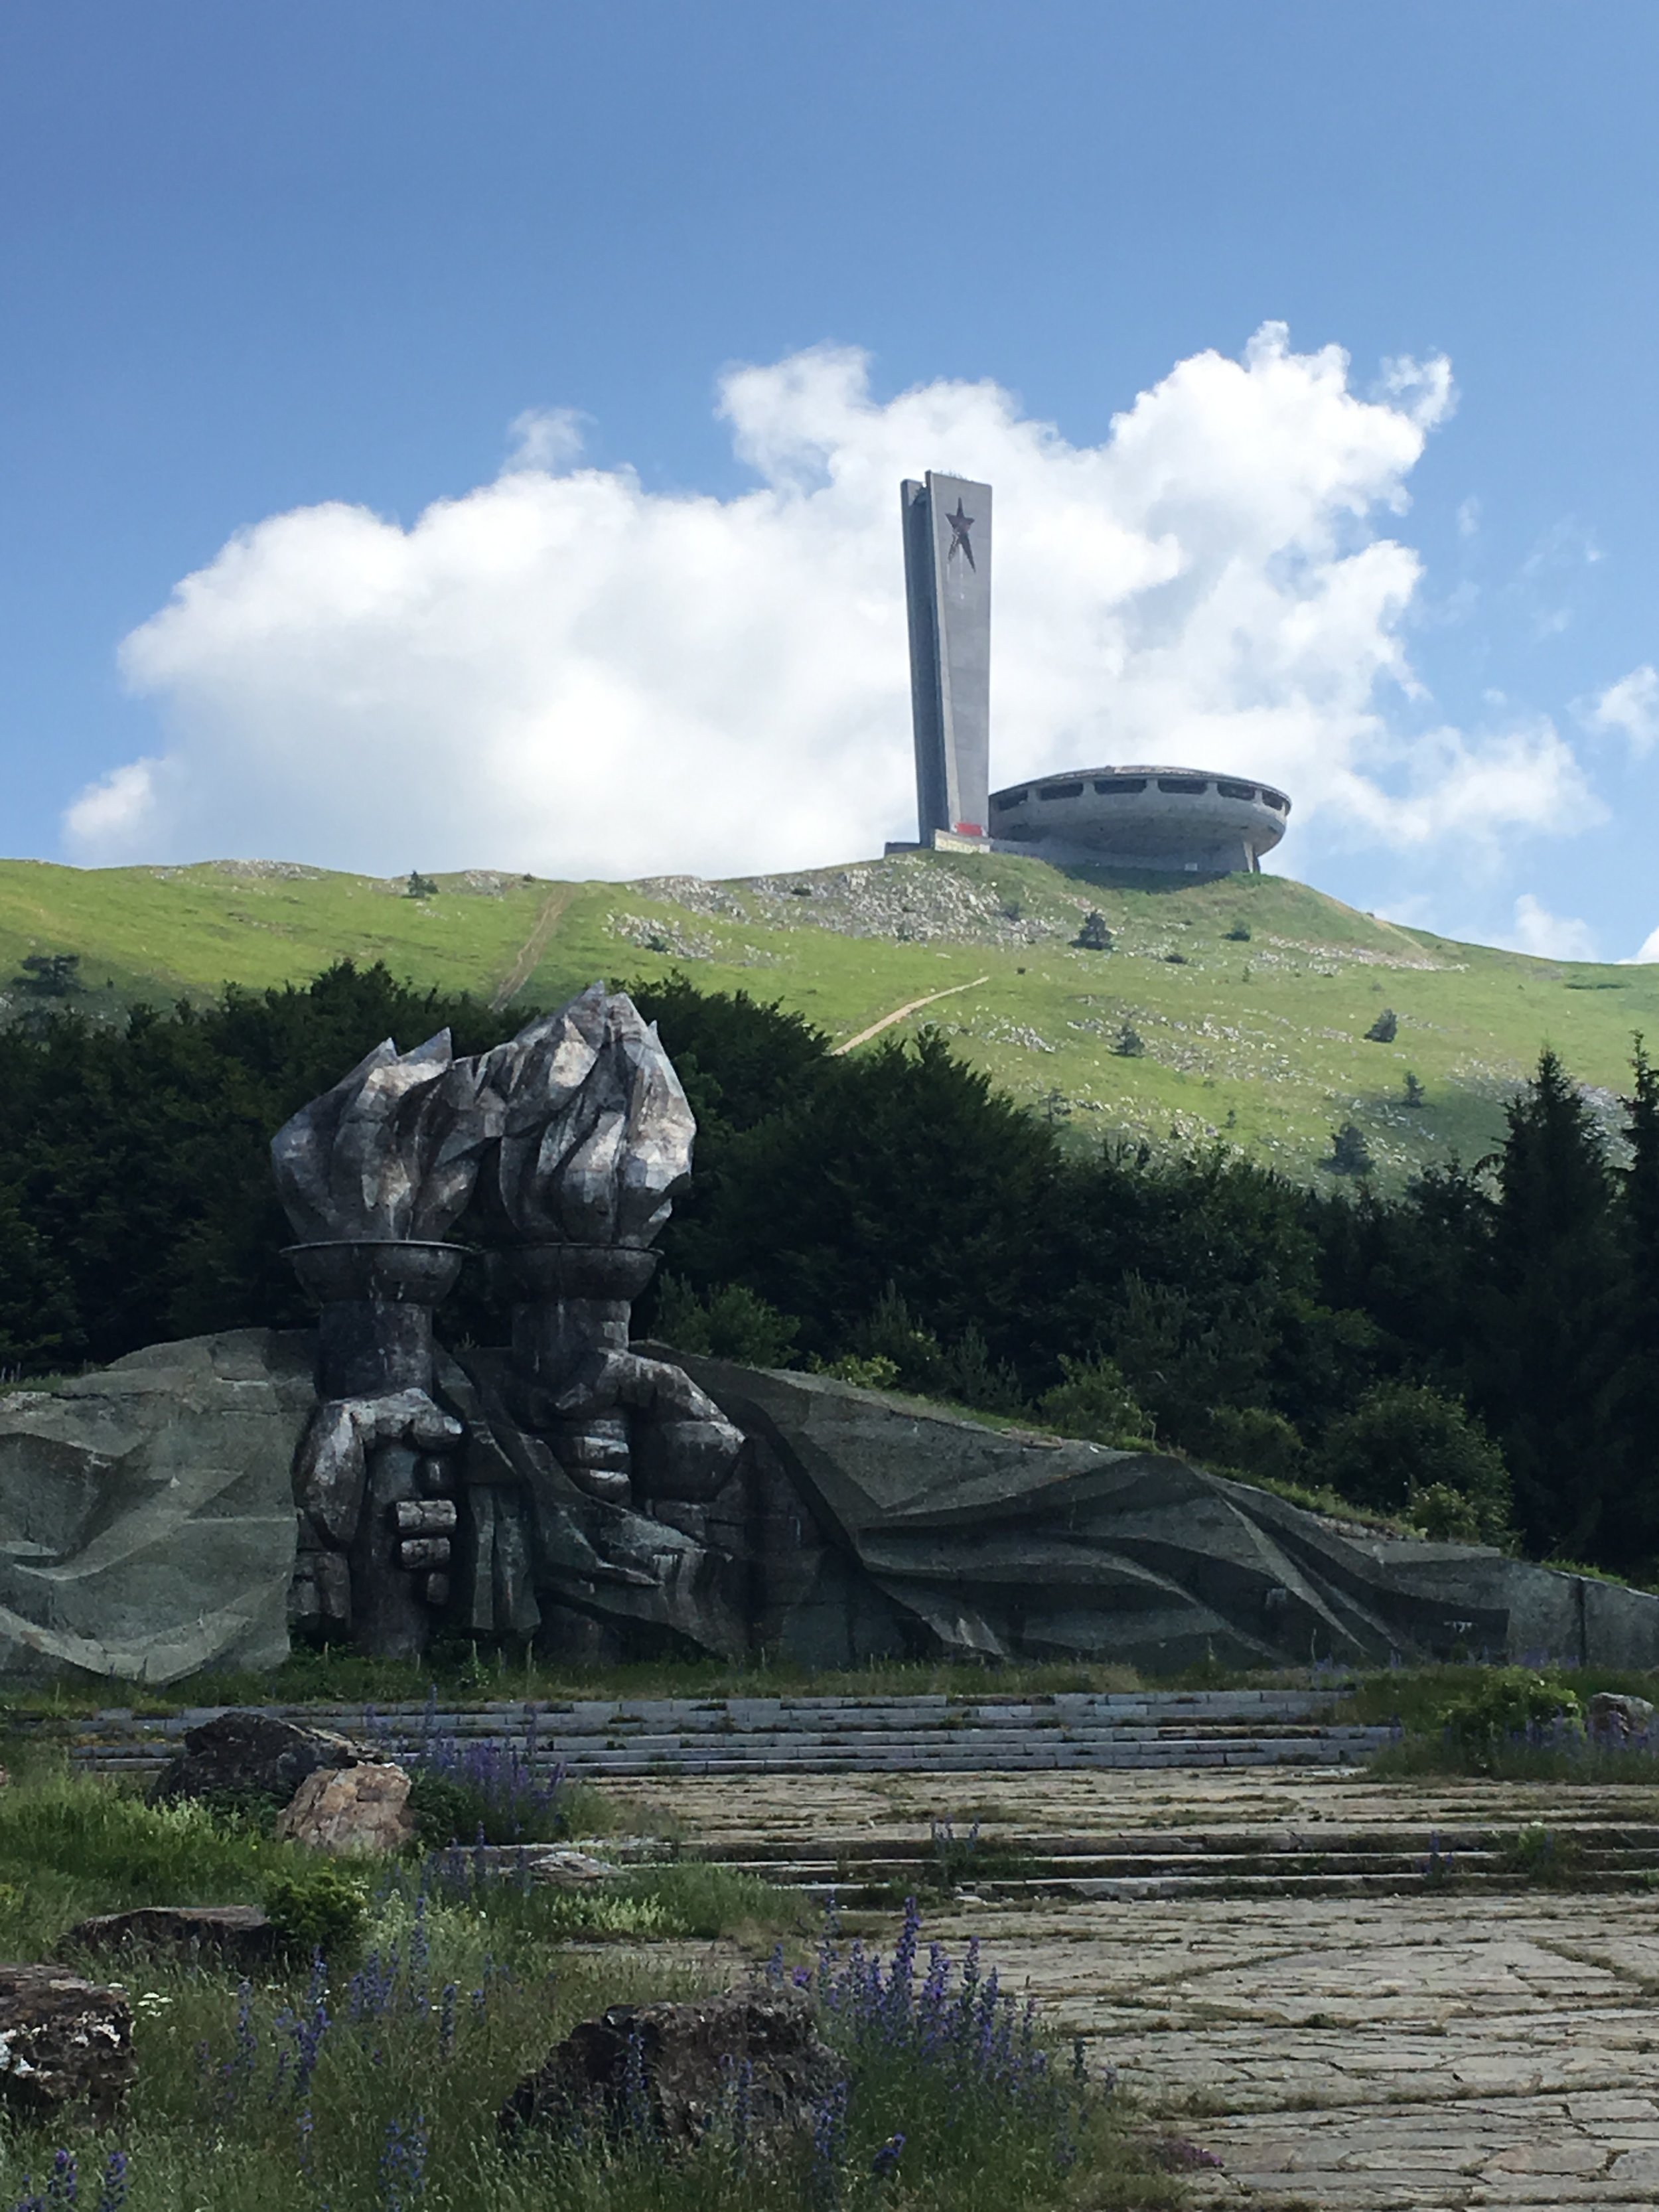 Things to do in Plovdiv, The UFO building, Buzludzha, it’s a day trip from Plovdiv